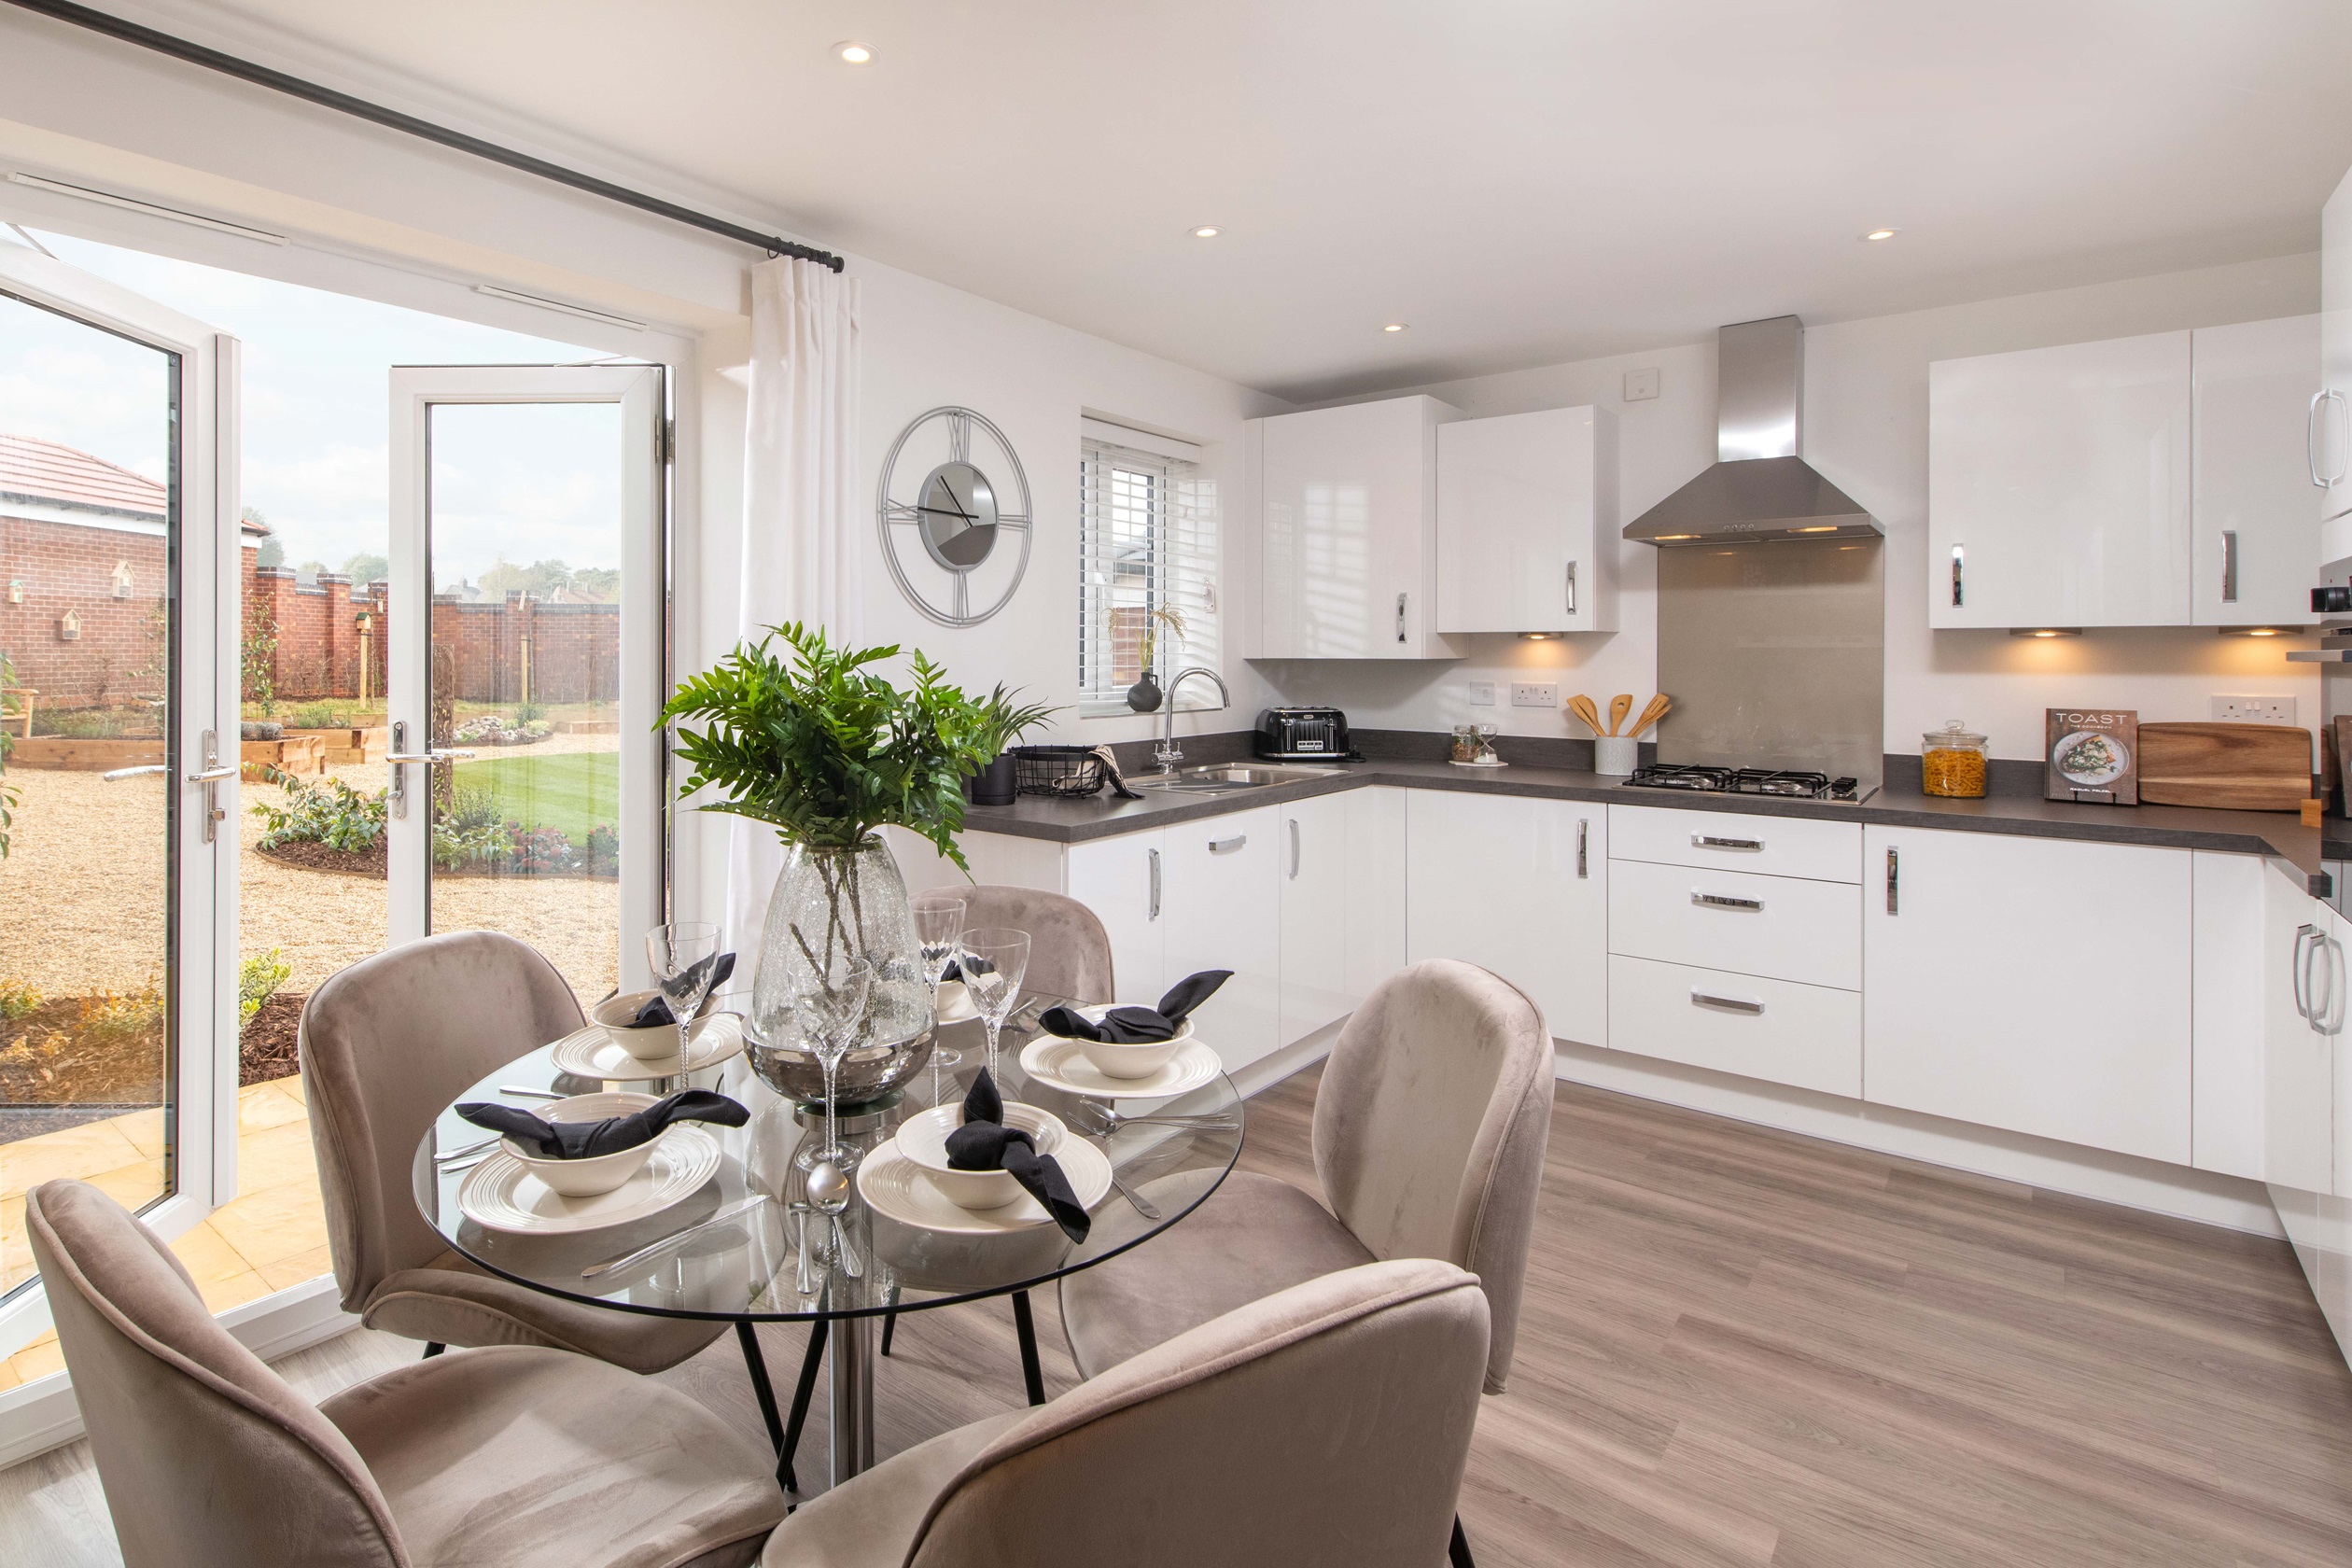 Property 3 of 9. Dwh Kennett Kitchen-Diner With French Doors